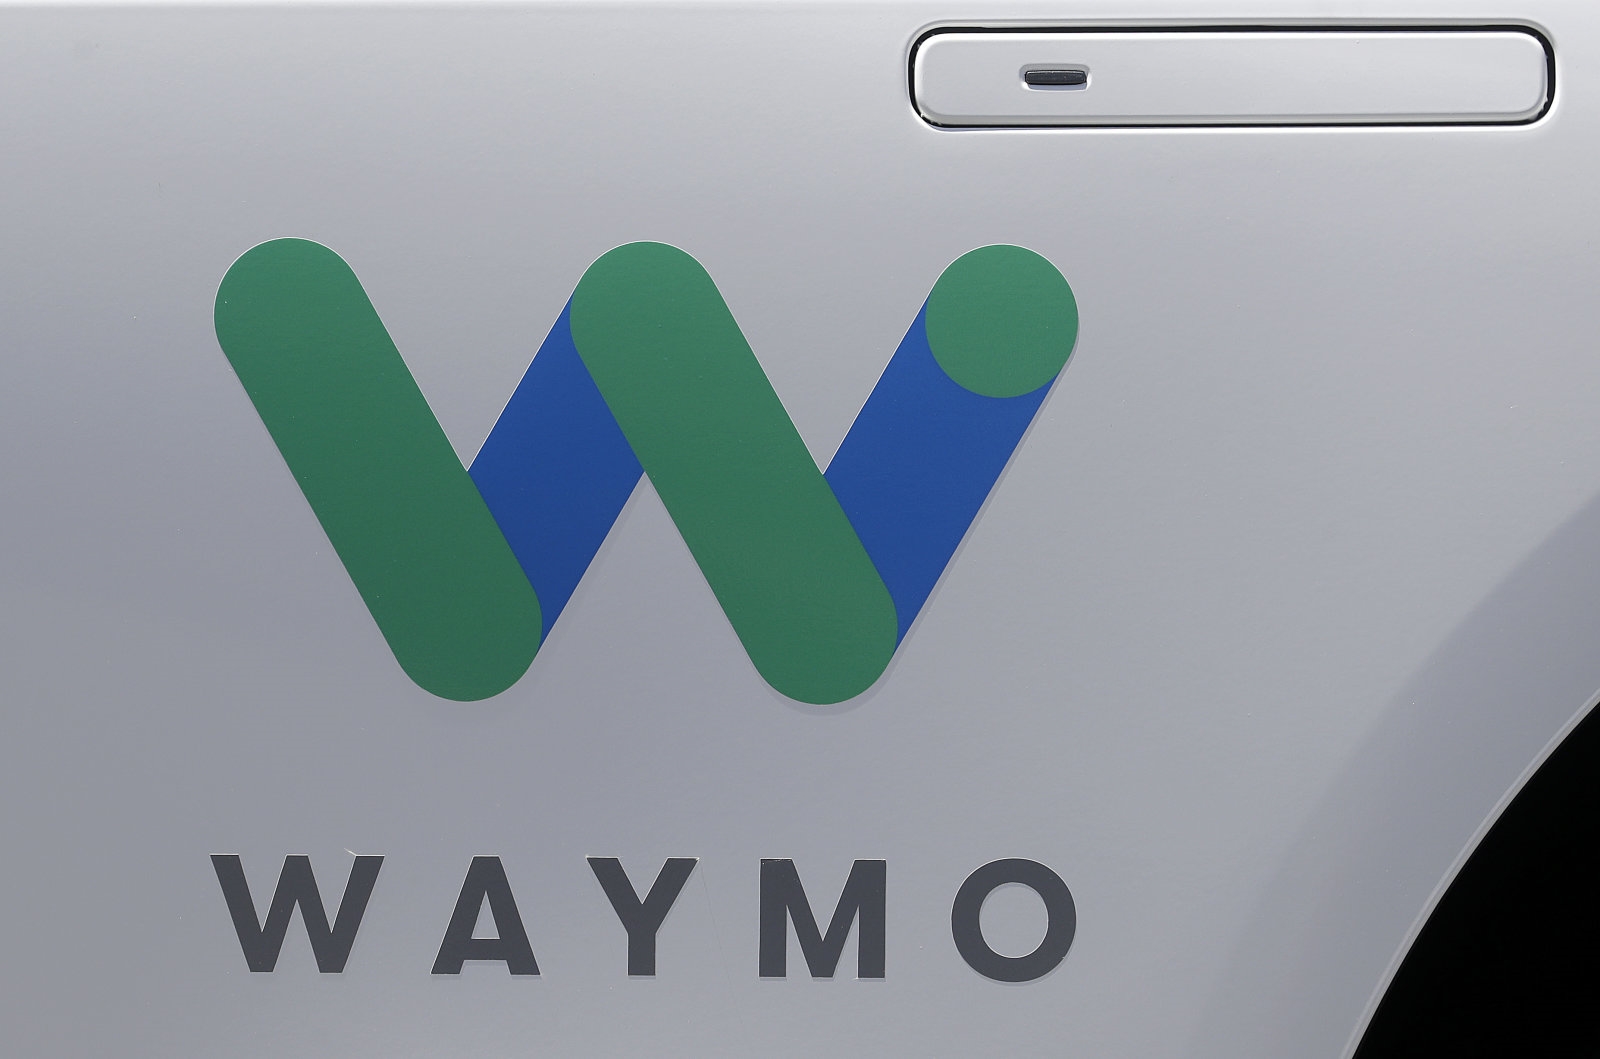 Waymo may team up with Renault-Nissan on self-driving taxis | DeviceDaily.com